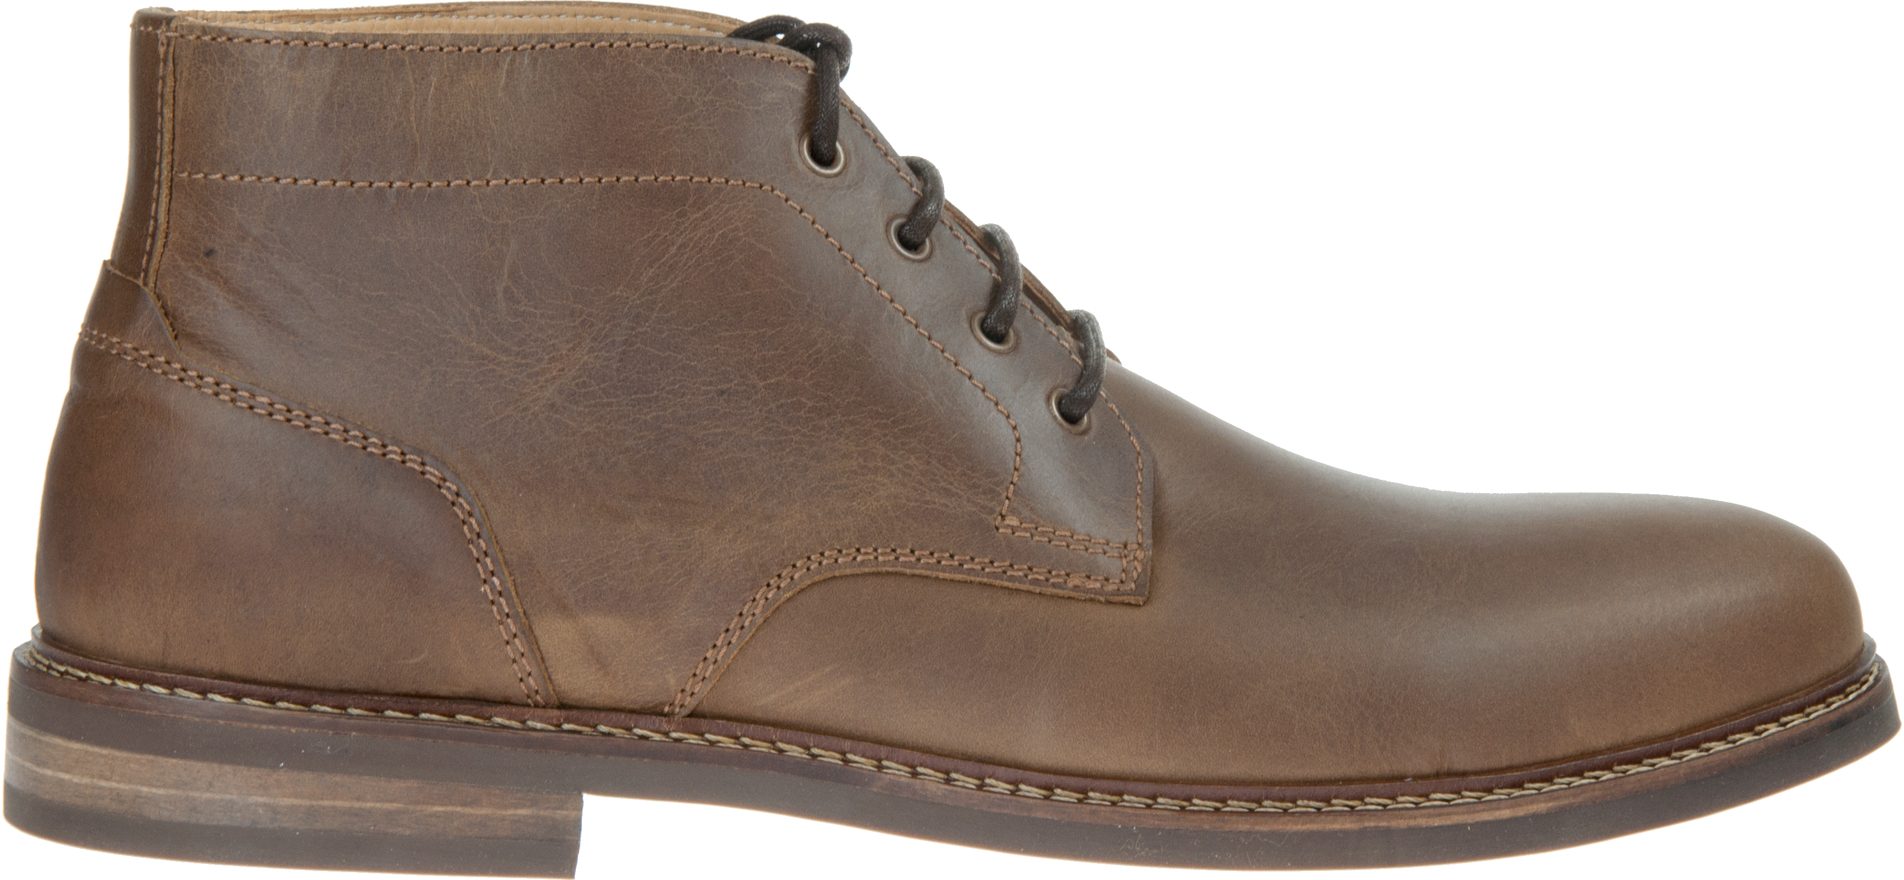 Loake Gilbert Brown Oiled Nubuck Leather GILCHN - Formal Boots ...